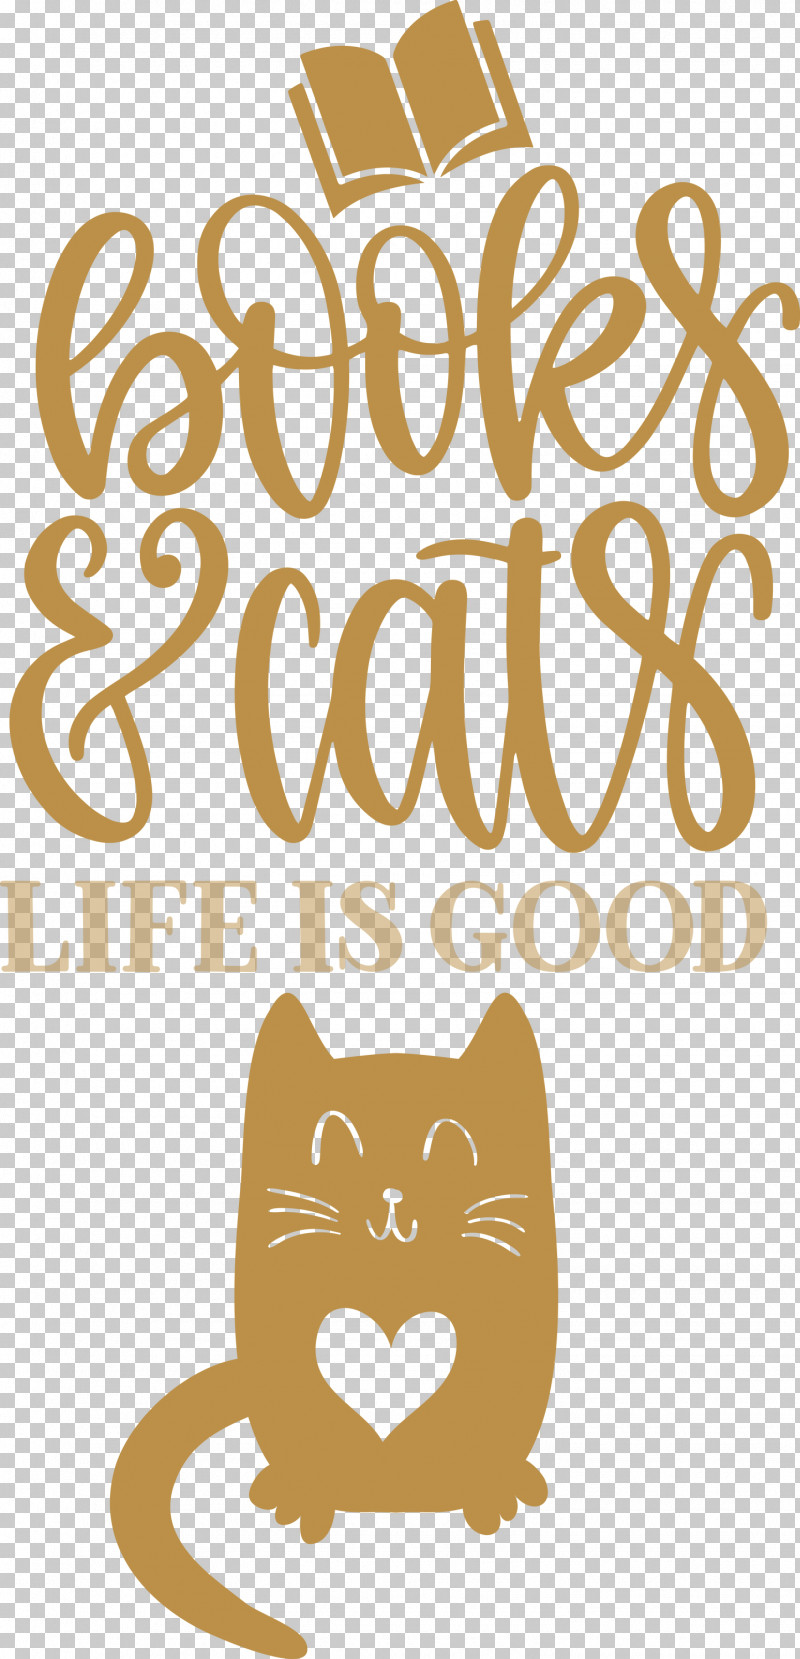 Books And Cats Cat PNG, Clipart, Cat, Catlike, Gin, Line, Logo Free PNG Download